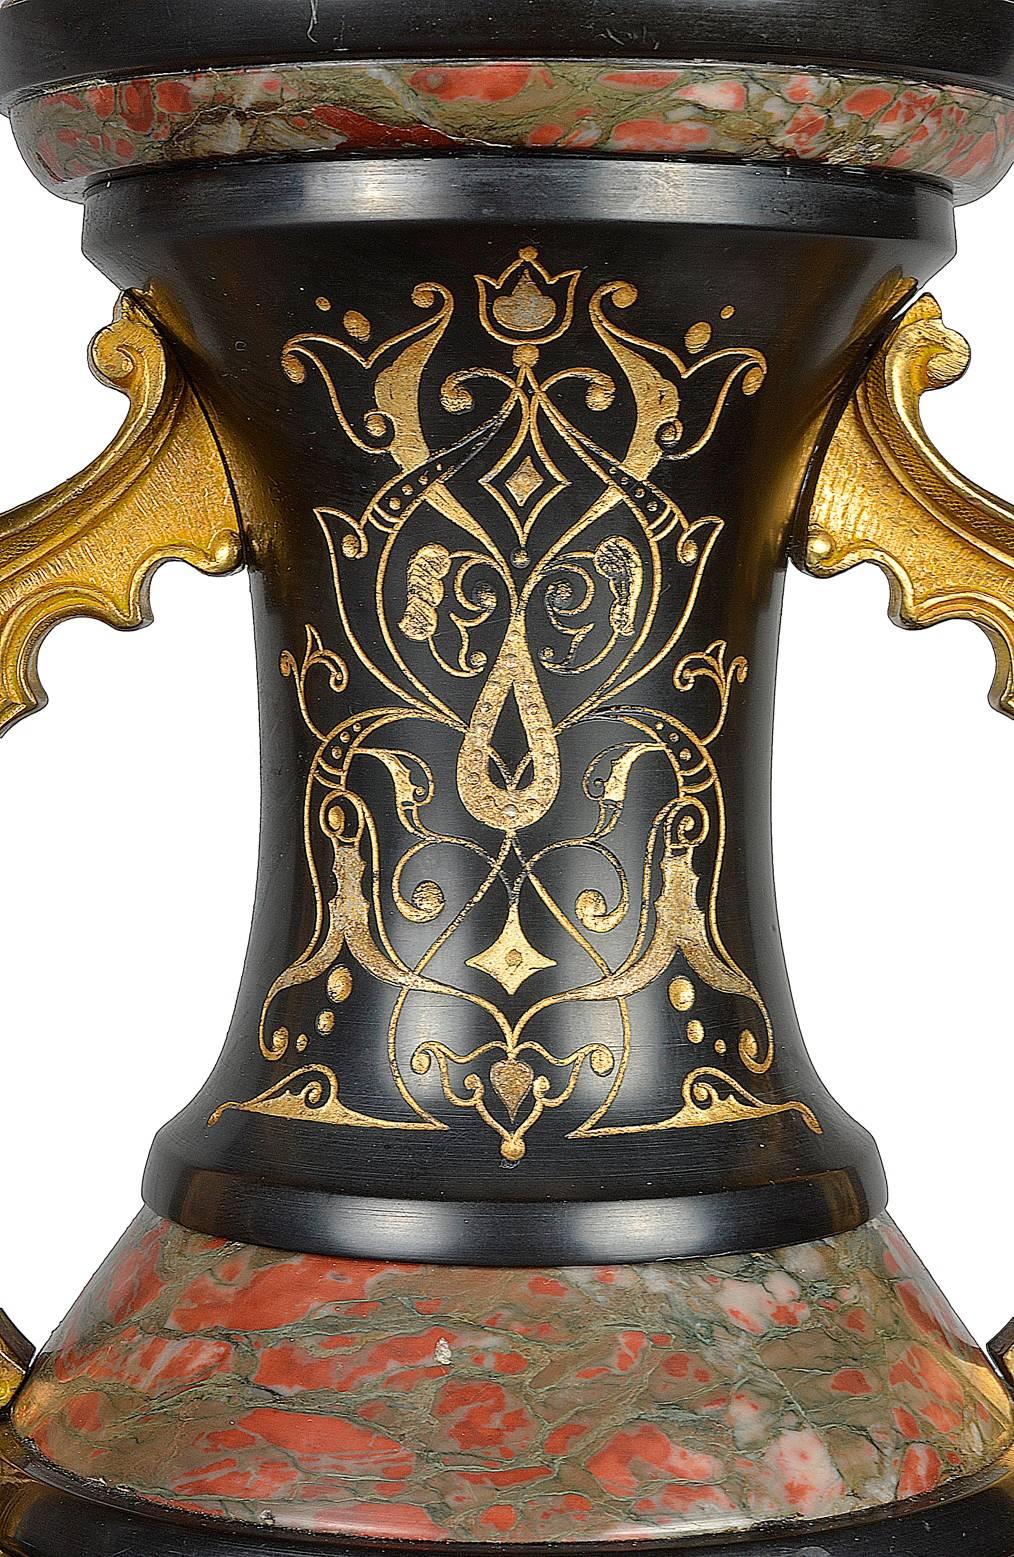 Engraved Islamic Influenced 19th Century Lamps For Sale